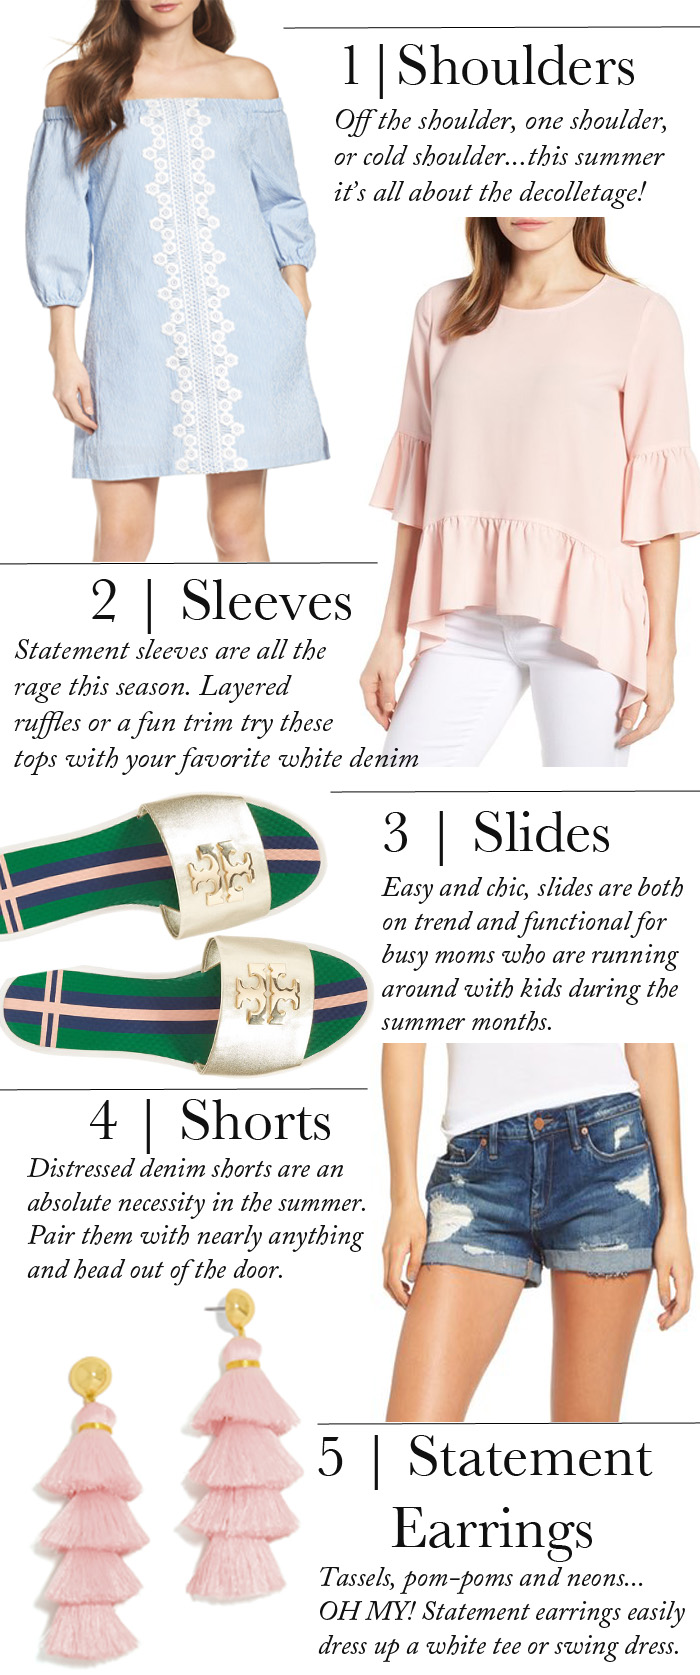 5 Summer Trends to Try